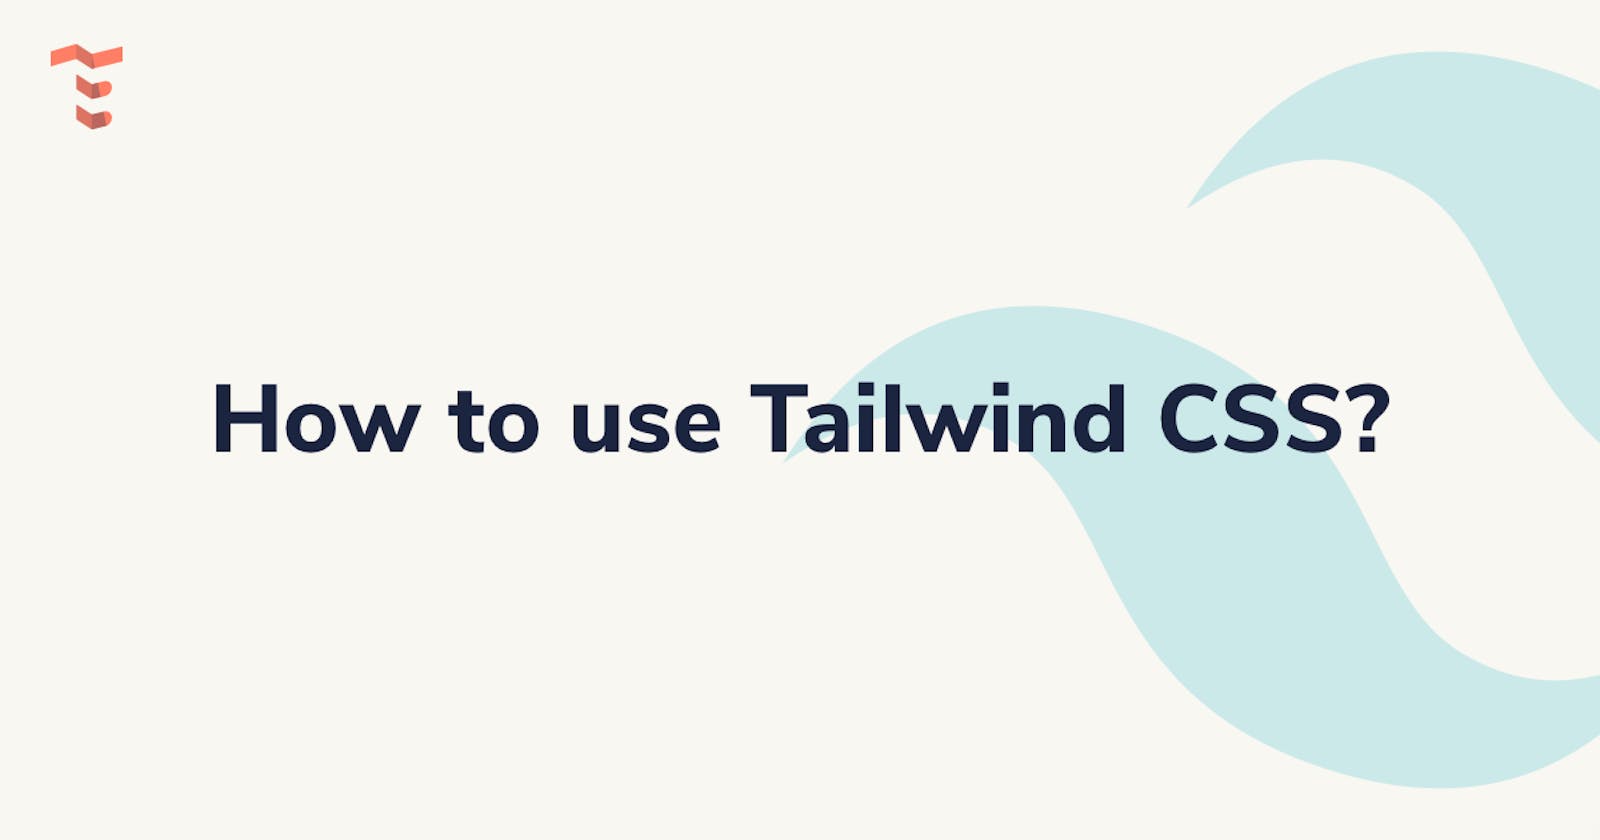 How to use Tailwind CSS?